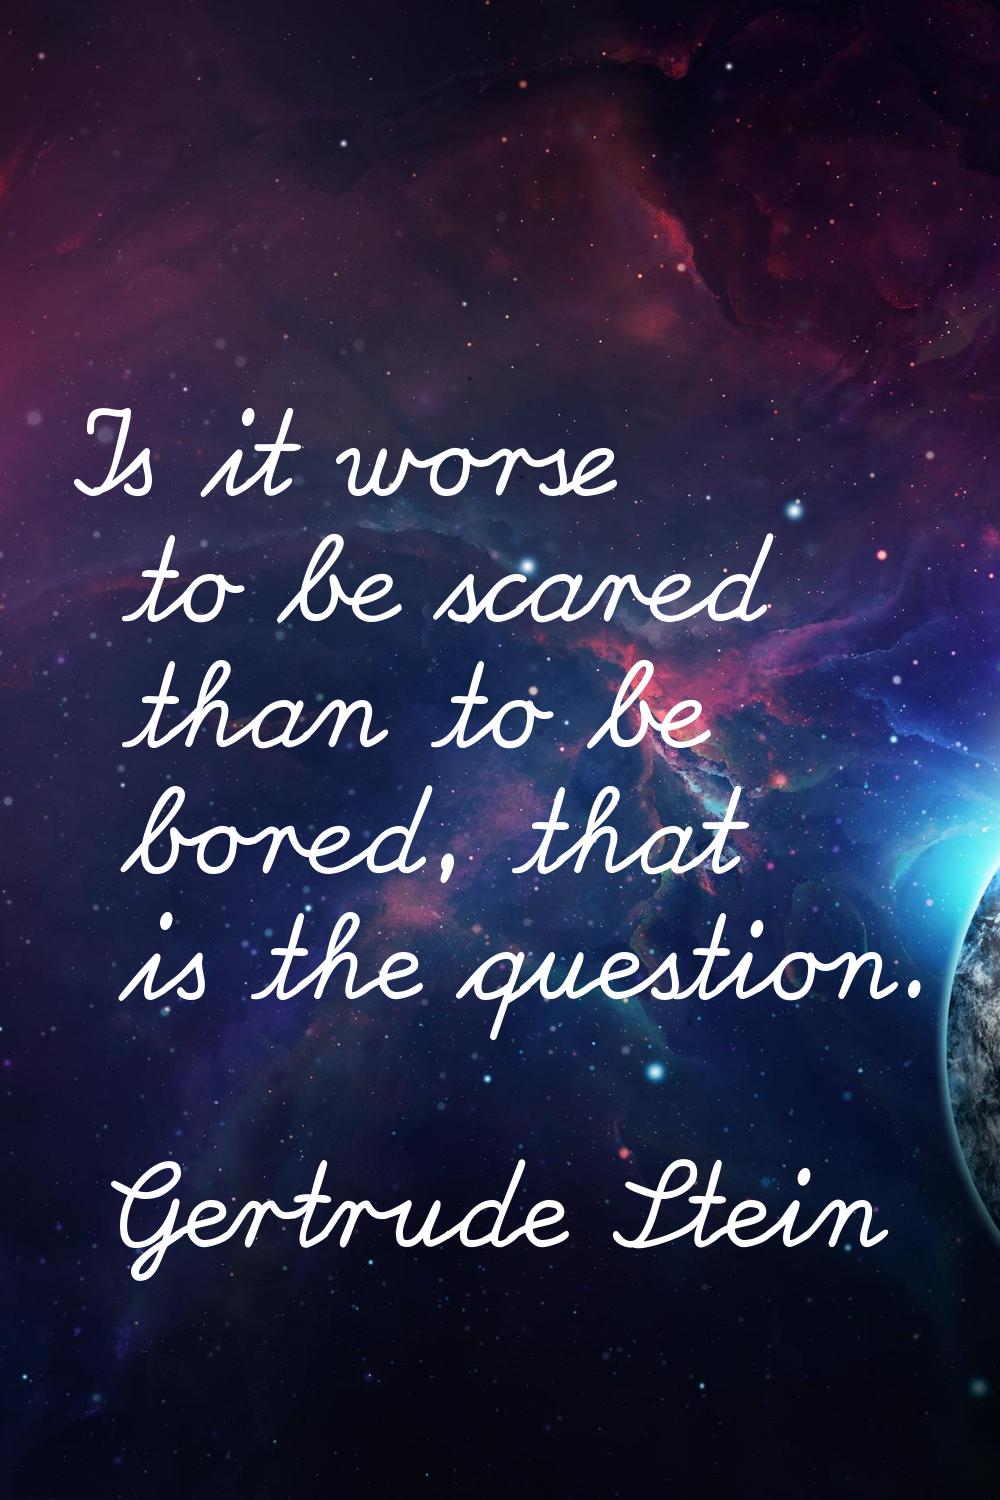 Is it worse to be scared than to be bored, that is the question.